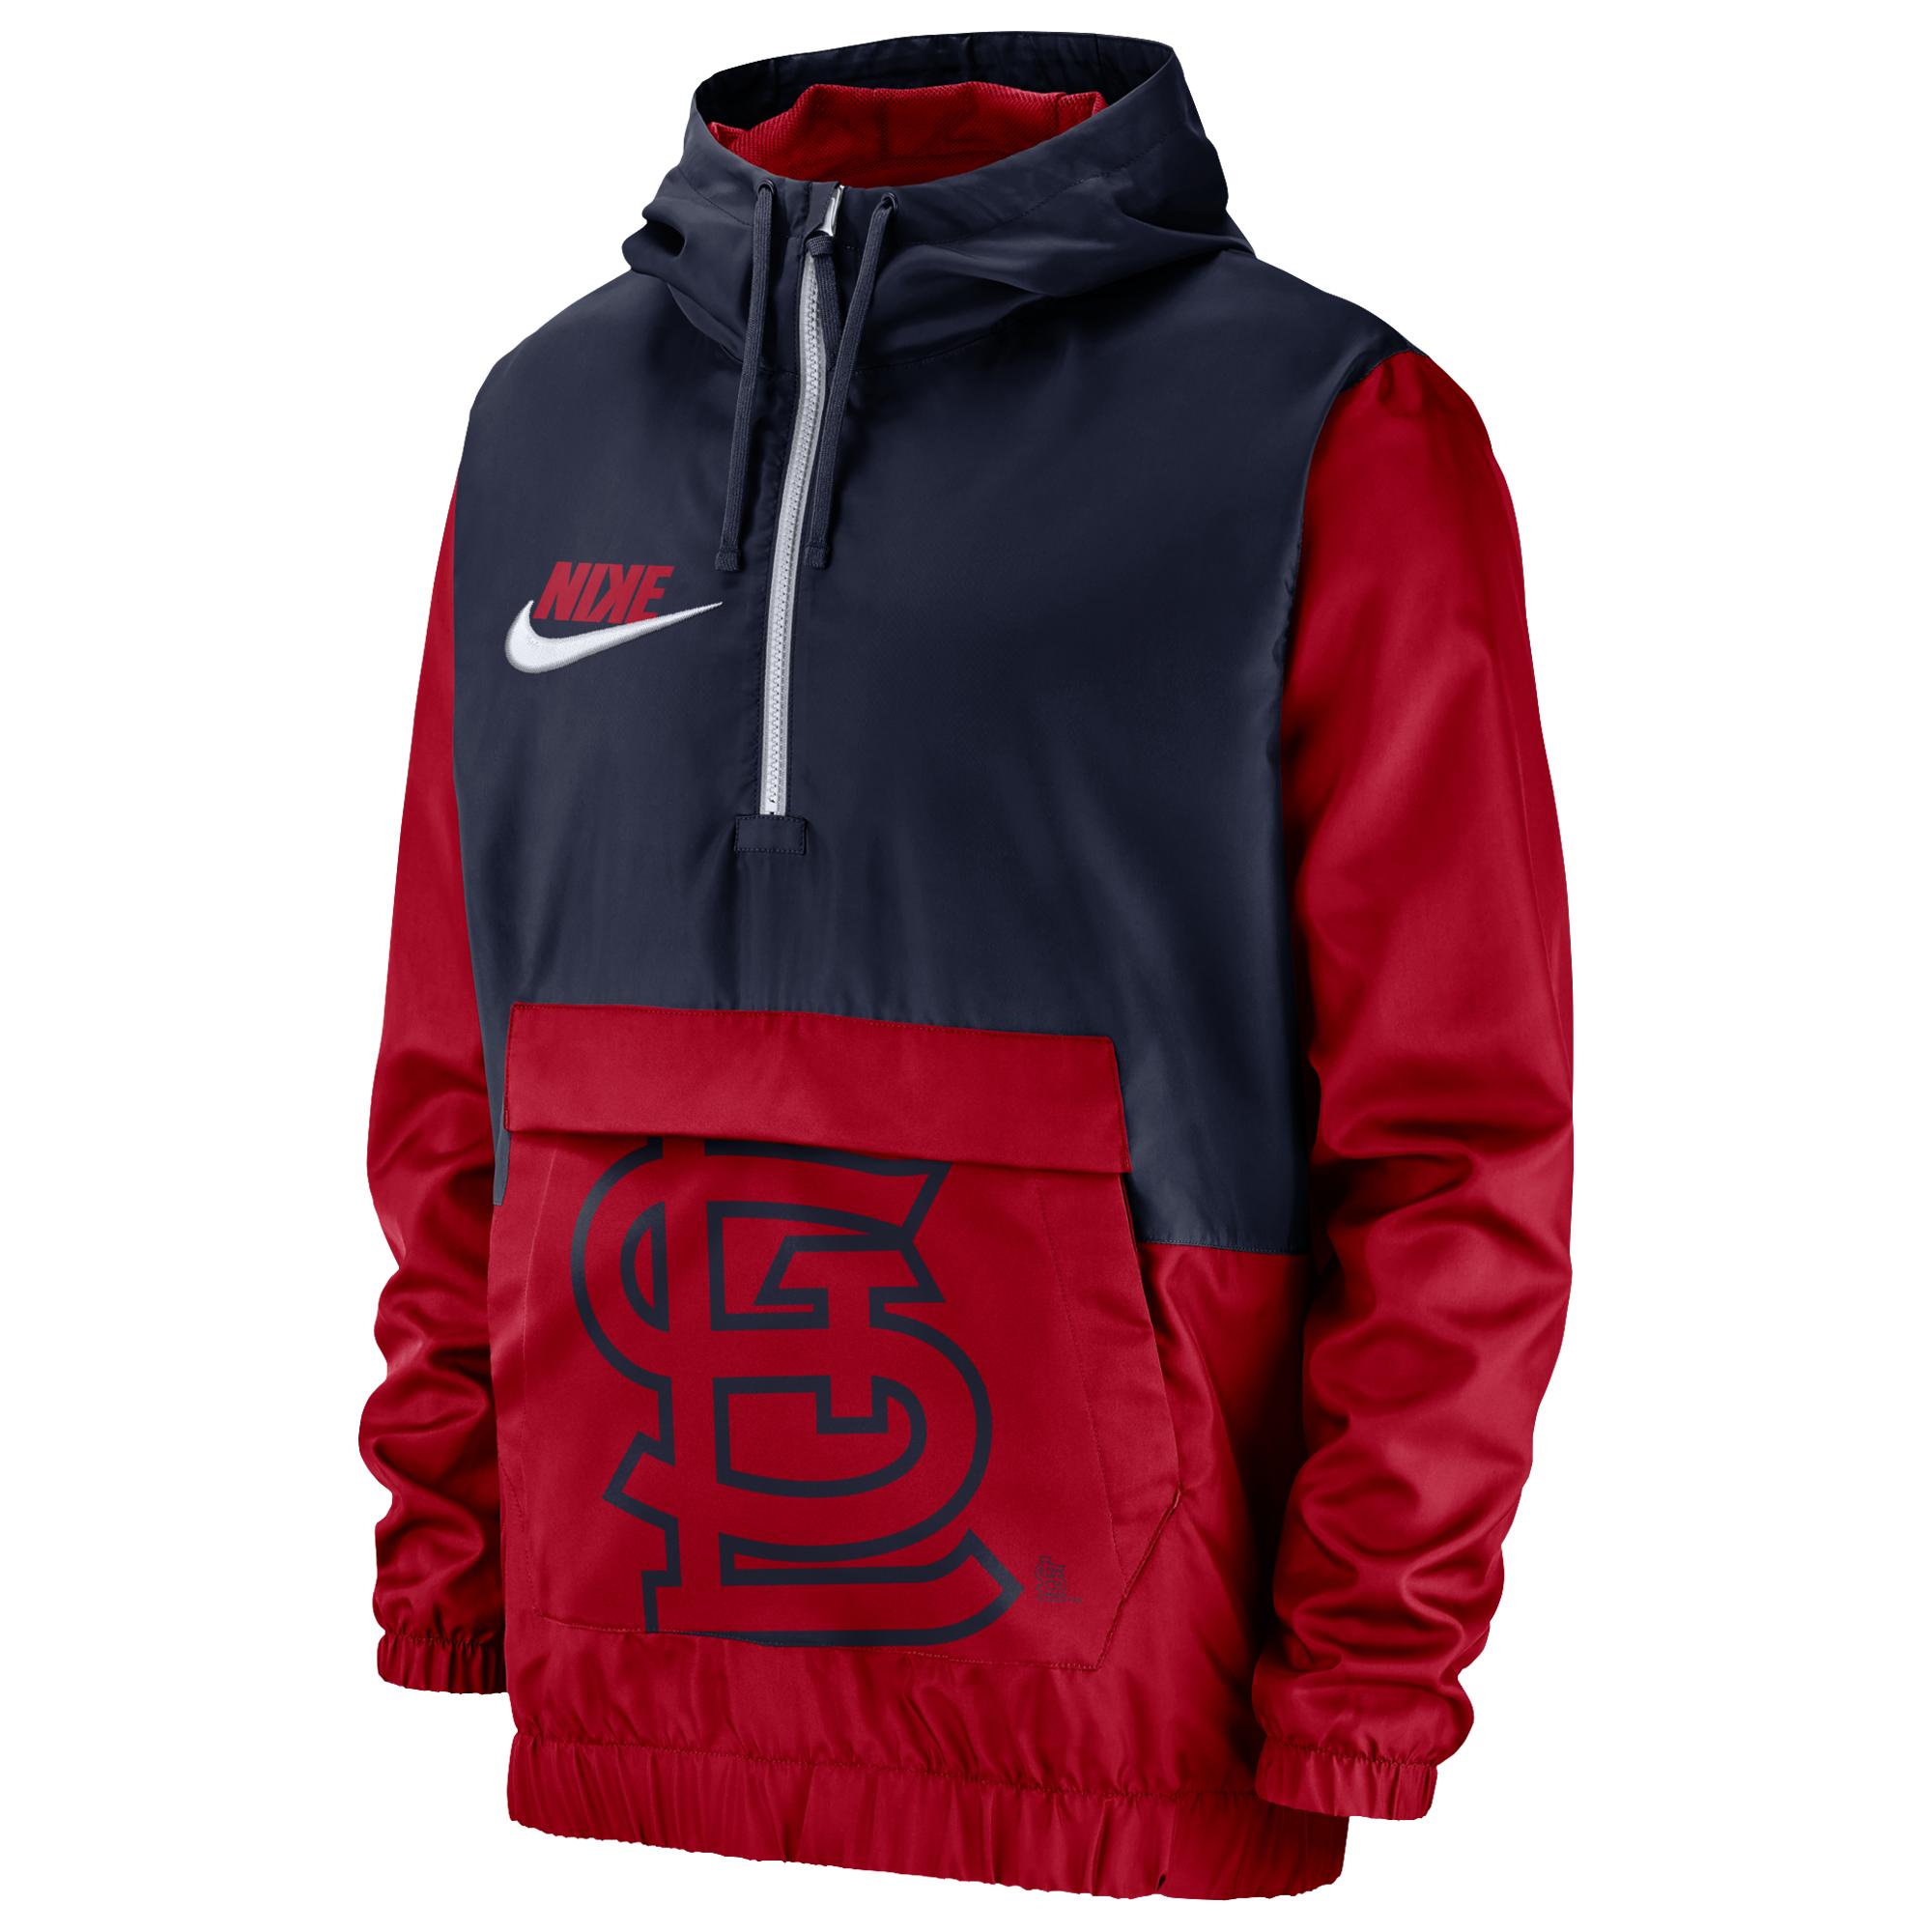 Nike Mlb Workout 1/2 Zip Anorak Jacket in Red for Men - Save 7% - Lyst